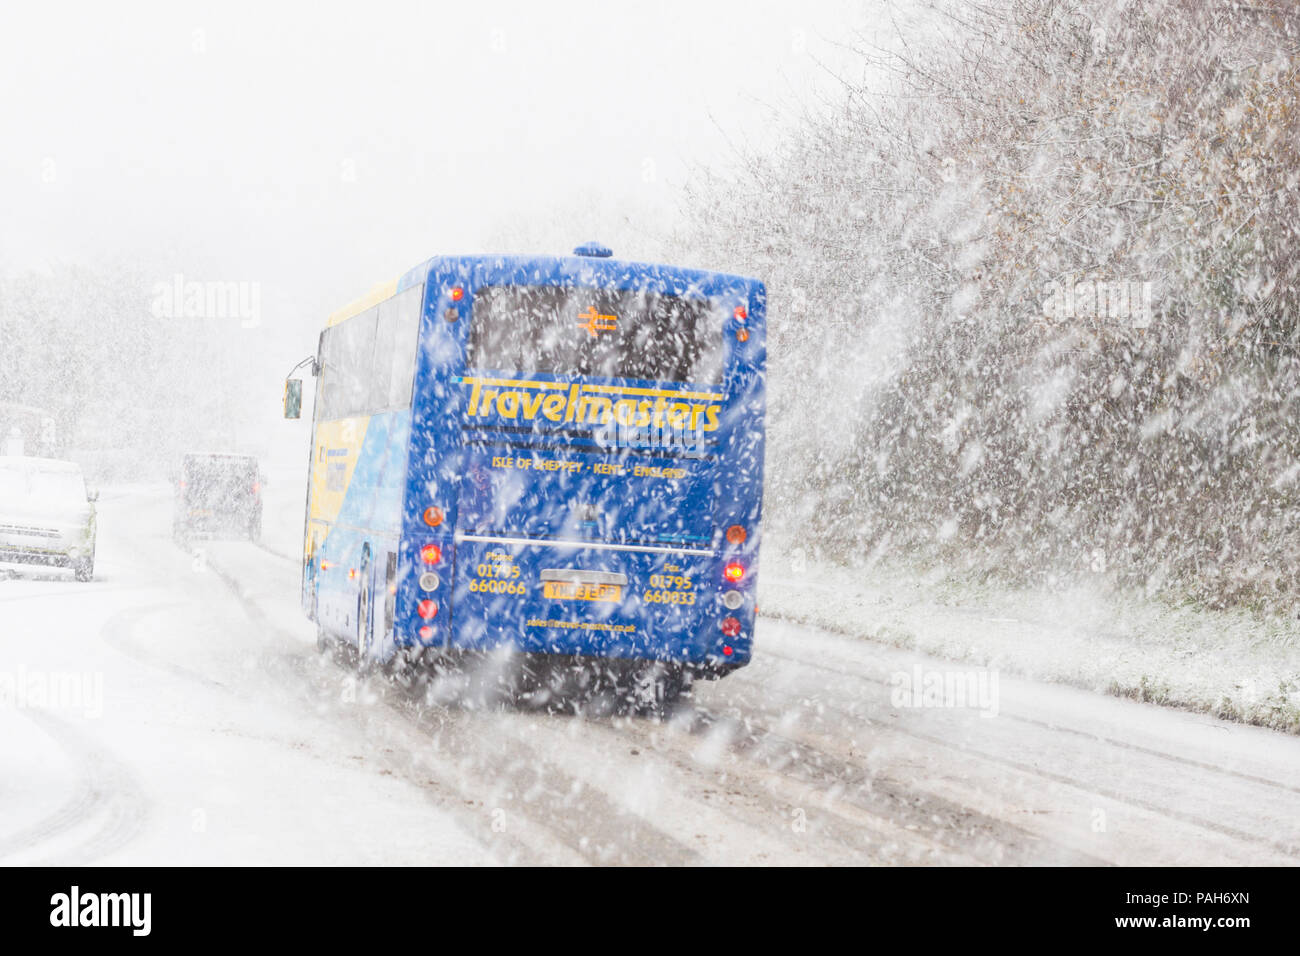 Travelmasters coach driving in heavy snow in winter, white out, blizzard conditions, hastings, east sussex, uk Stock Photo